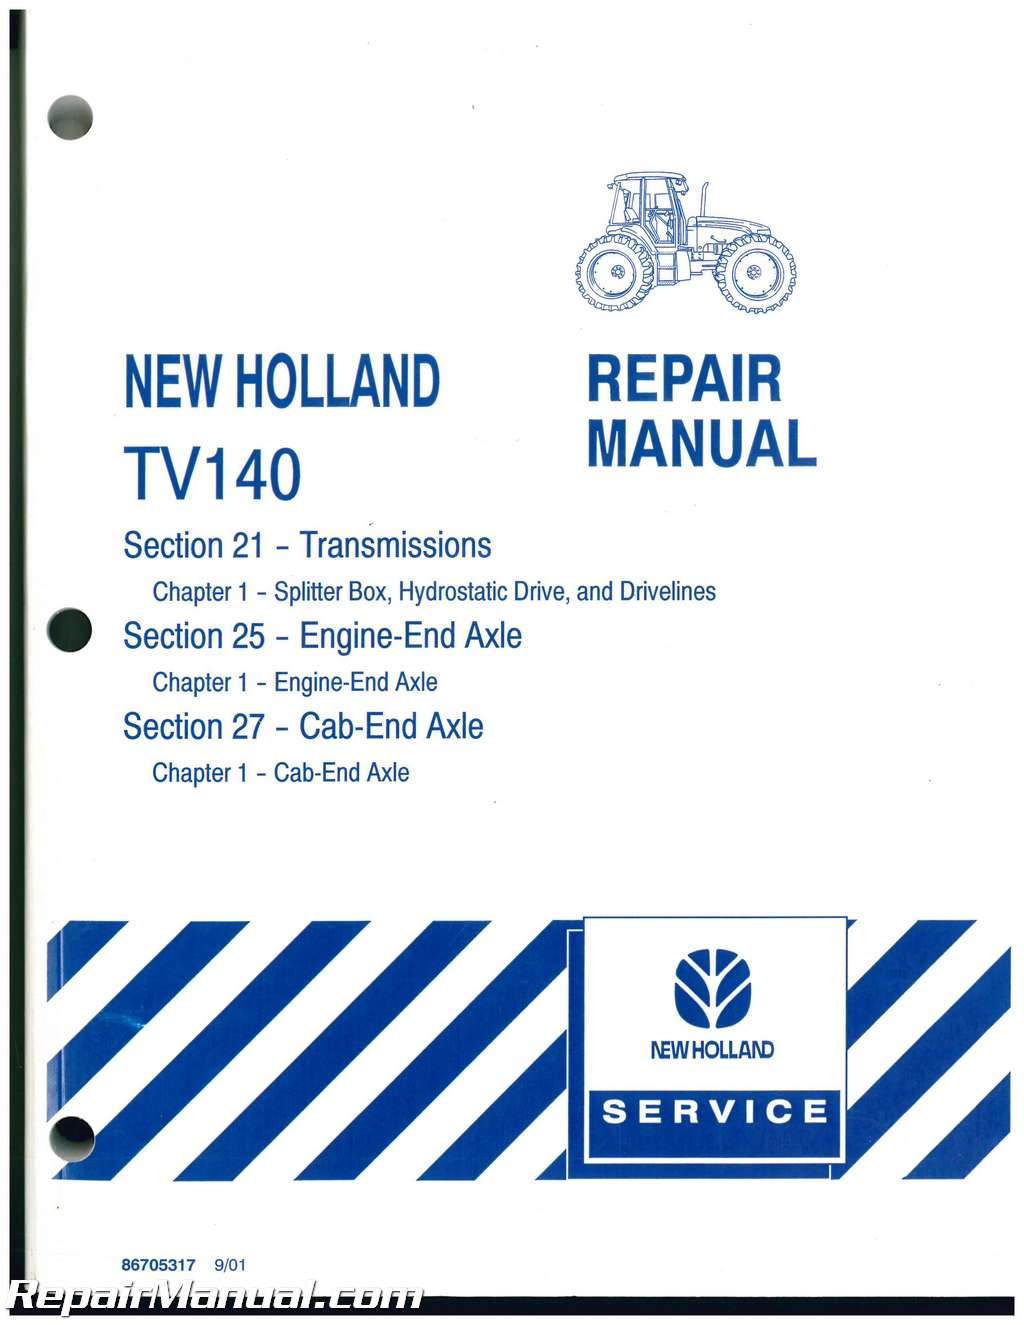 Ford New Holland TV140 Bidirectional 4WD Diesel Tractor Service Manual